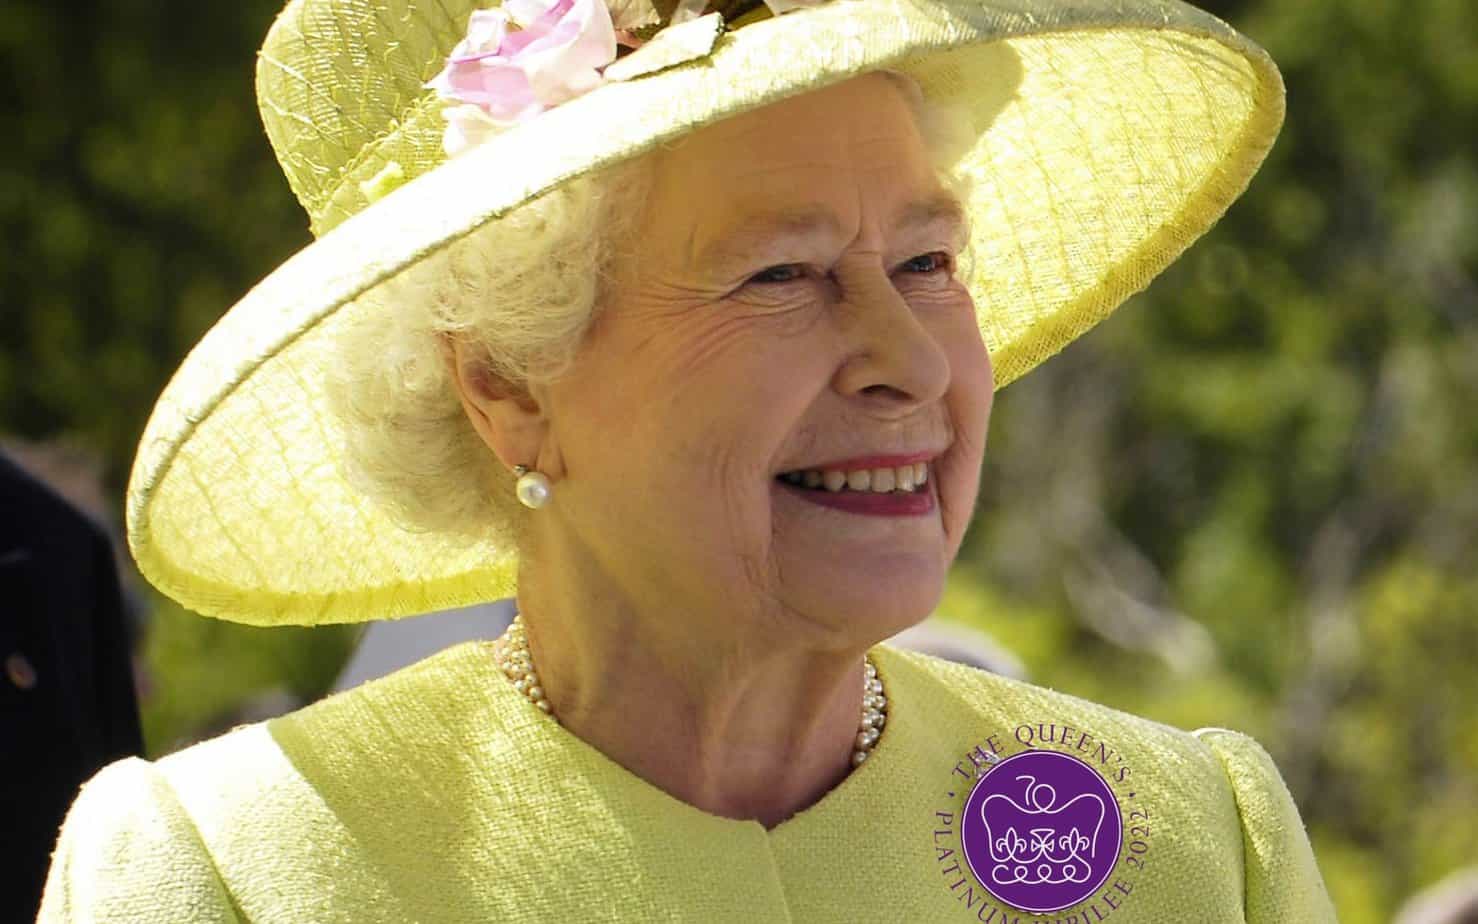 The significance of Queen Elizabeth 11  (1926-2022) to Christians Worldwide